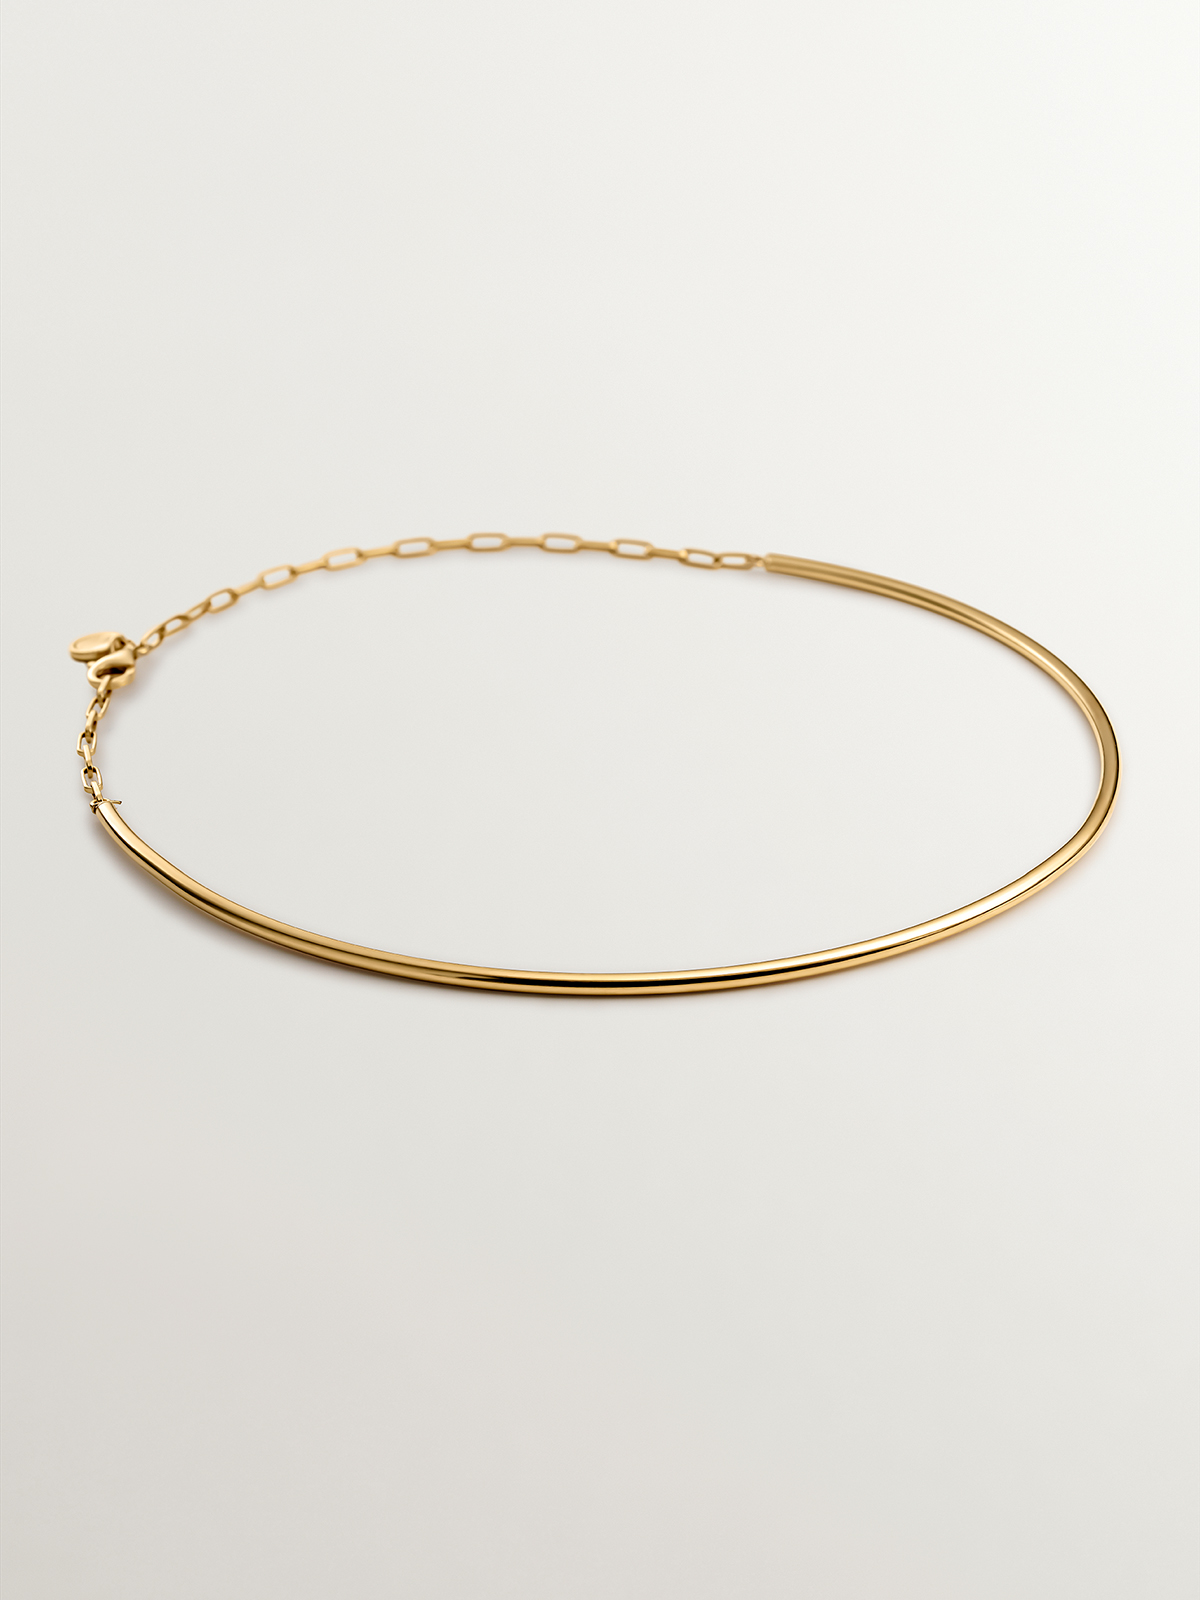 Rigid necklace made of 925 sterling silver coated in 18K yellow gold.